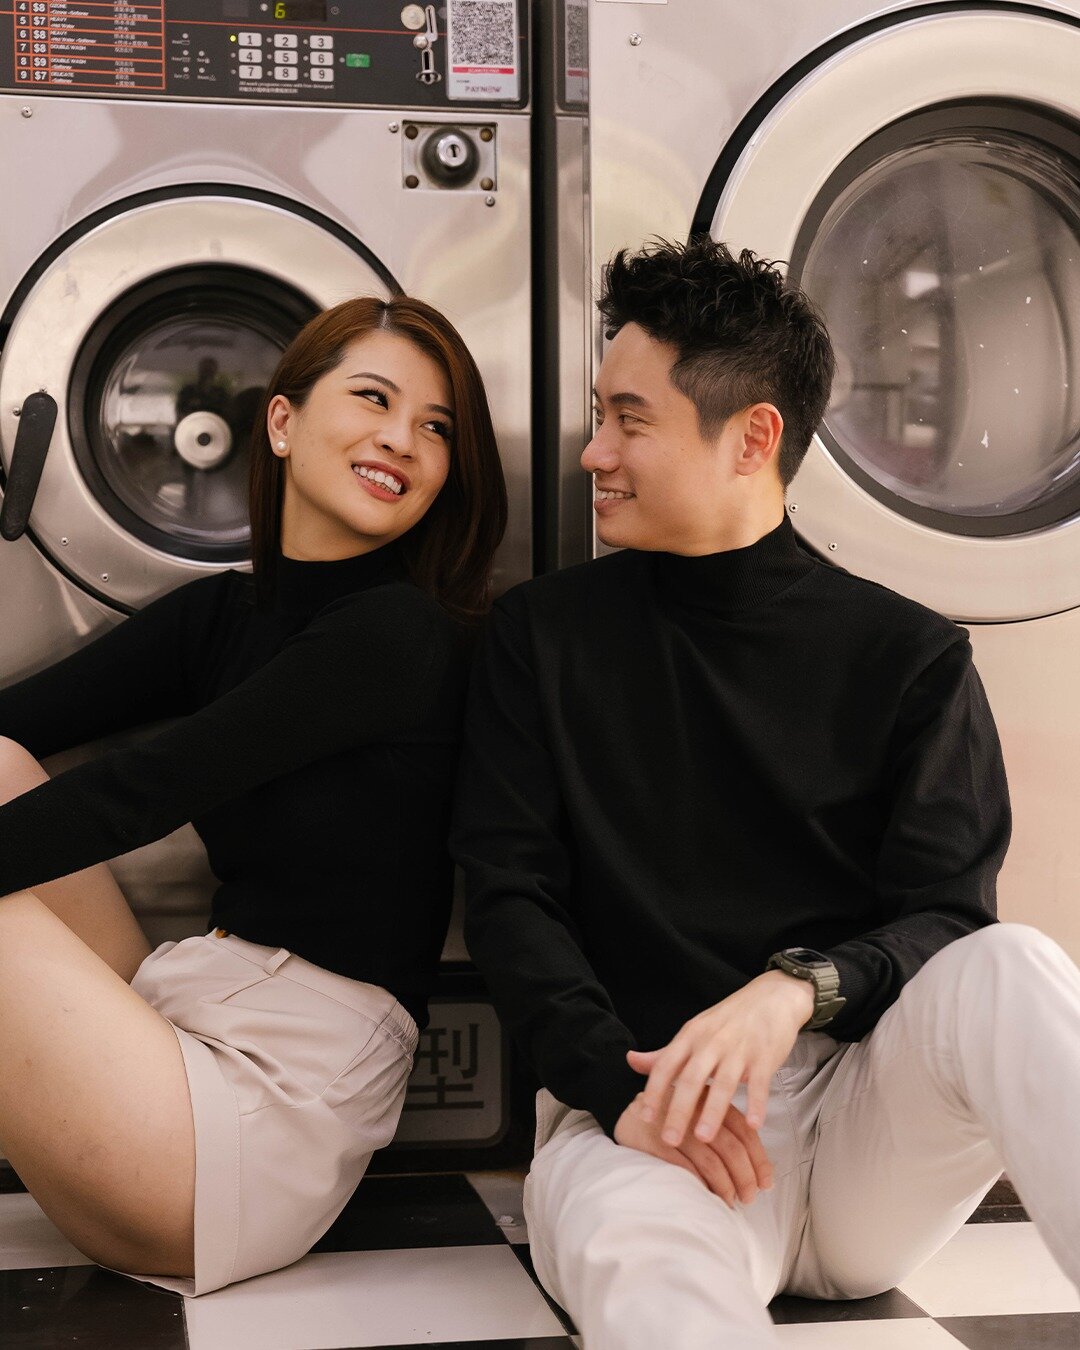 who says romance only happens in movies? suan and esther found love amidst the whirr of washing machines and the scent of fabric softener. an unconventional but priceless love story indeed! 🧺💑
.
for more info on our 2024 couple photoshoot packages,